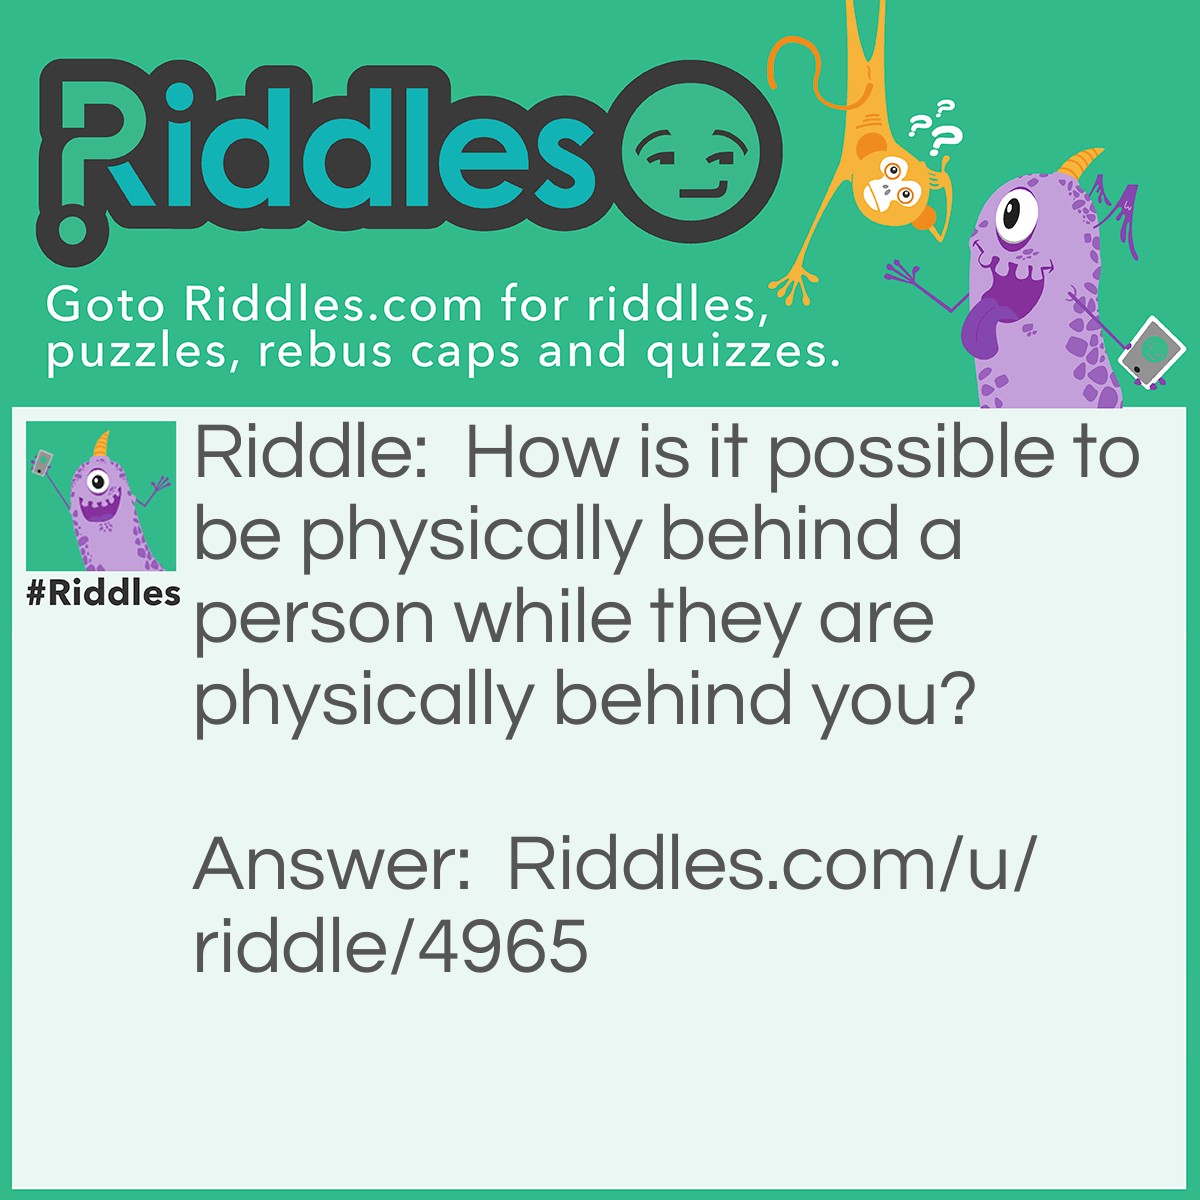 Riddle: How is it possible to be physically behind a person while they are physically behind you? Answer: Stand back-to-back!